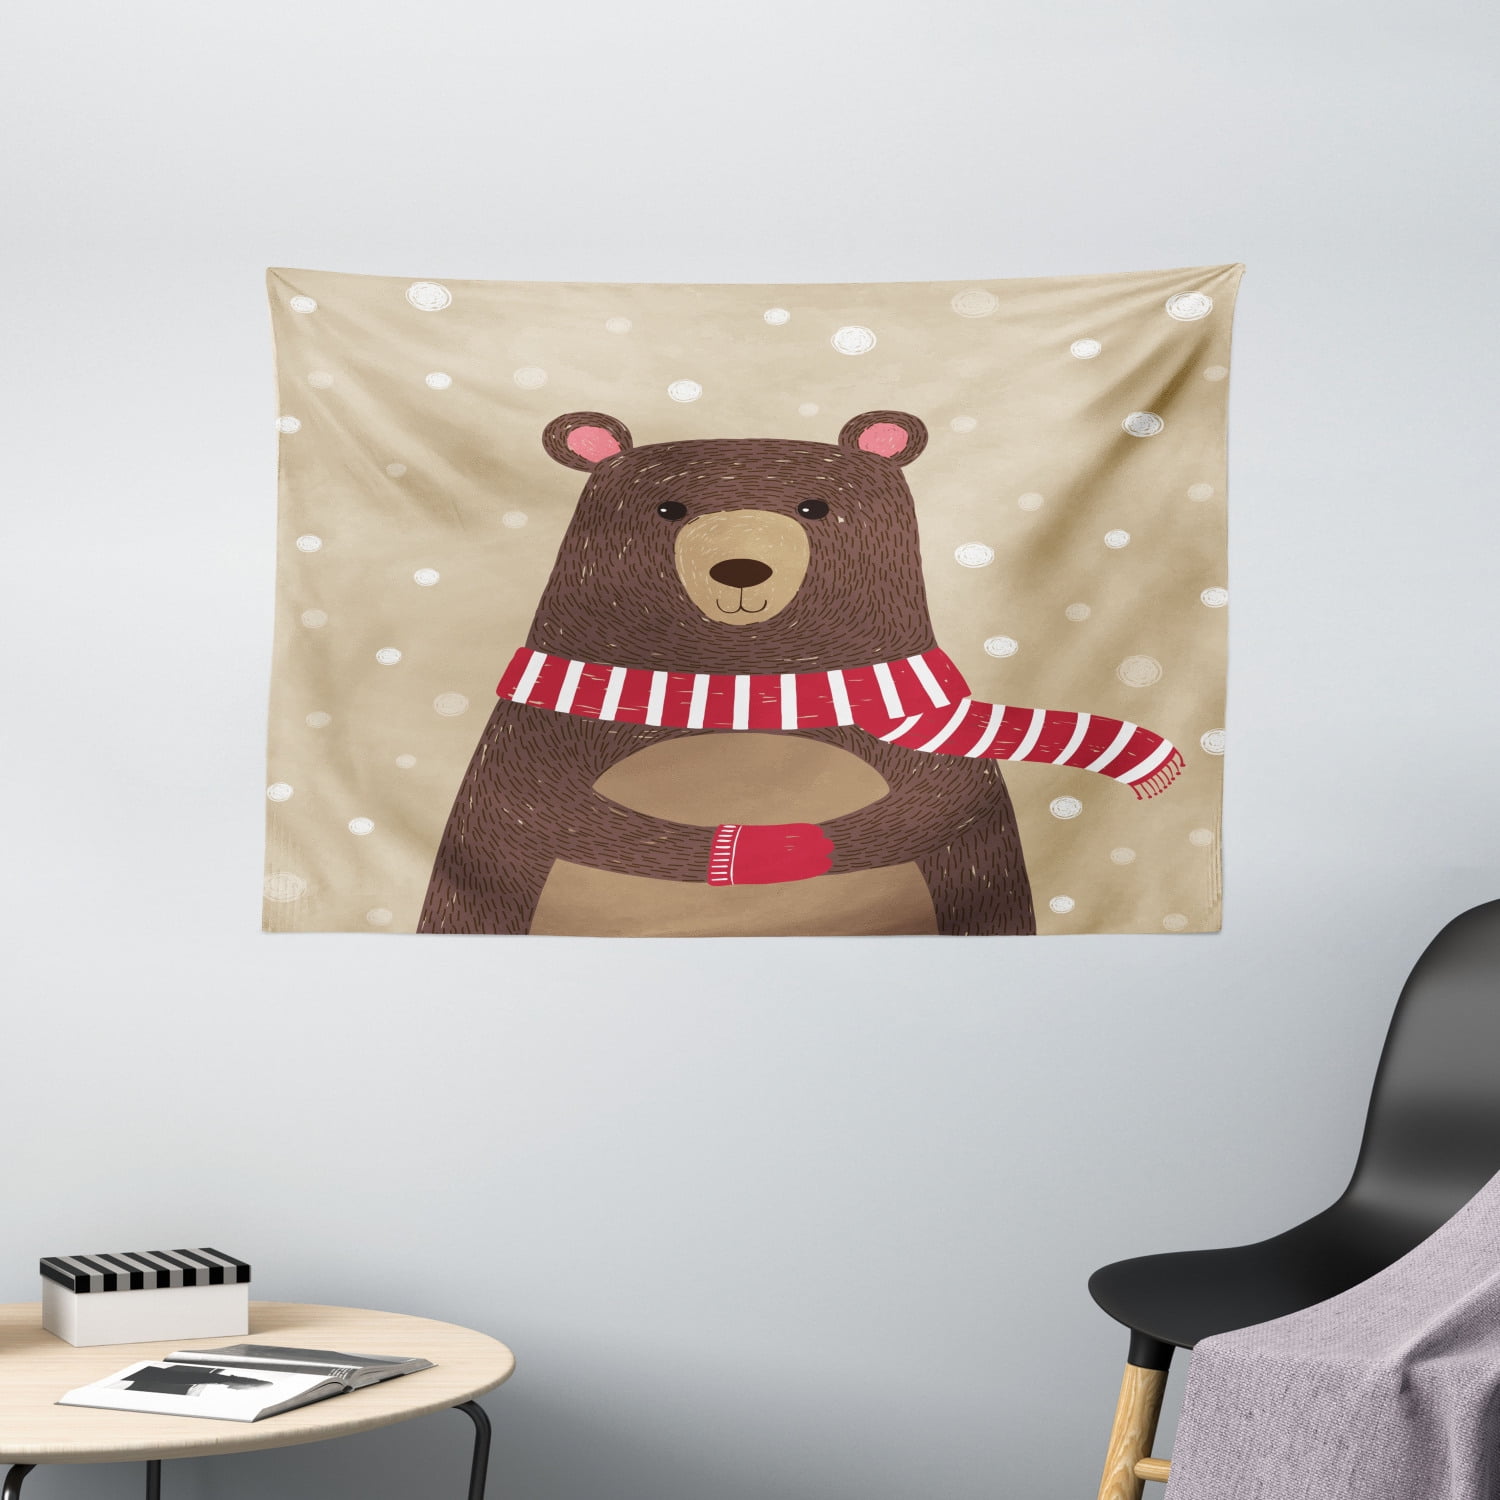 8 x 12 Multicolor Carolines Treasures Teddy Bear on The Beach Wall or Door Hanging Prints APH0088DS812